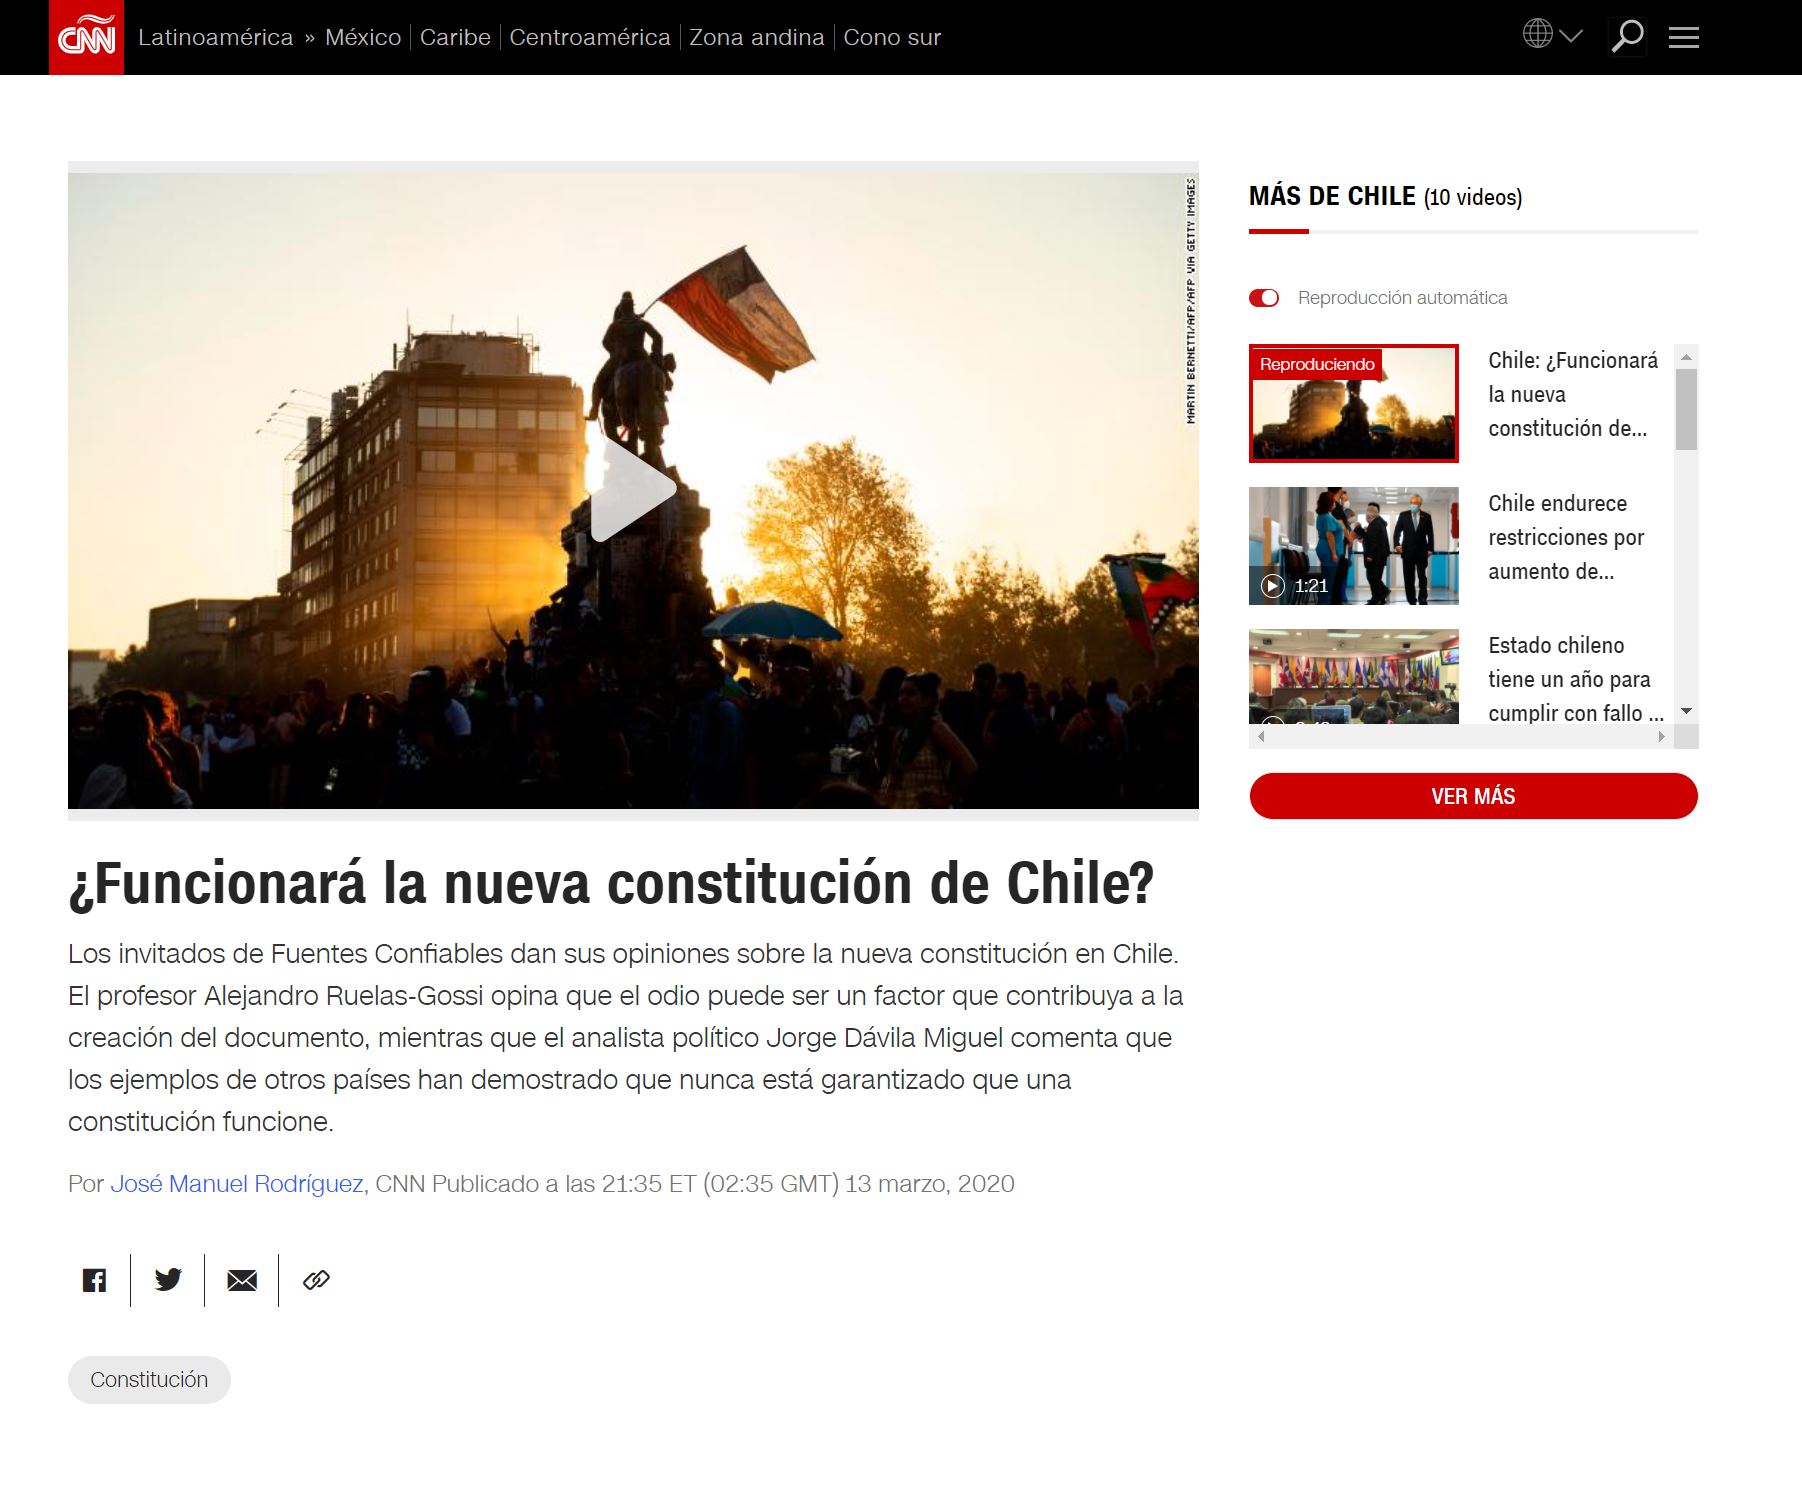 Will Chile’s new constitution work?